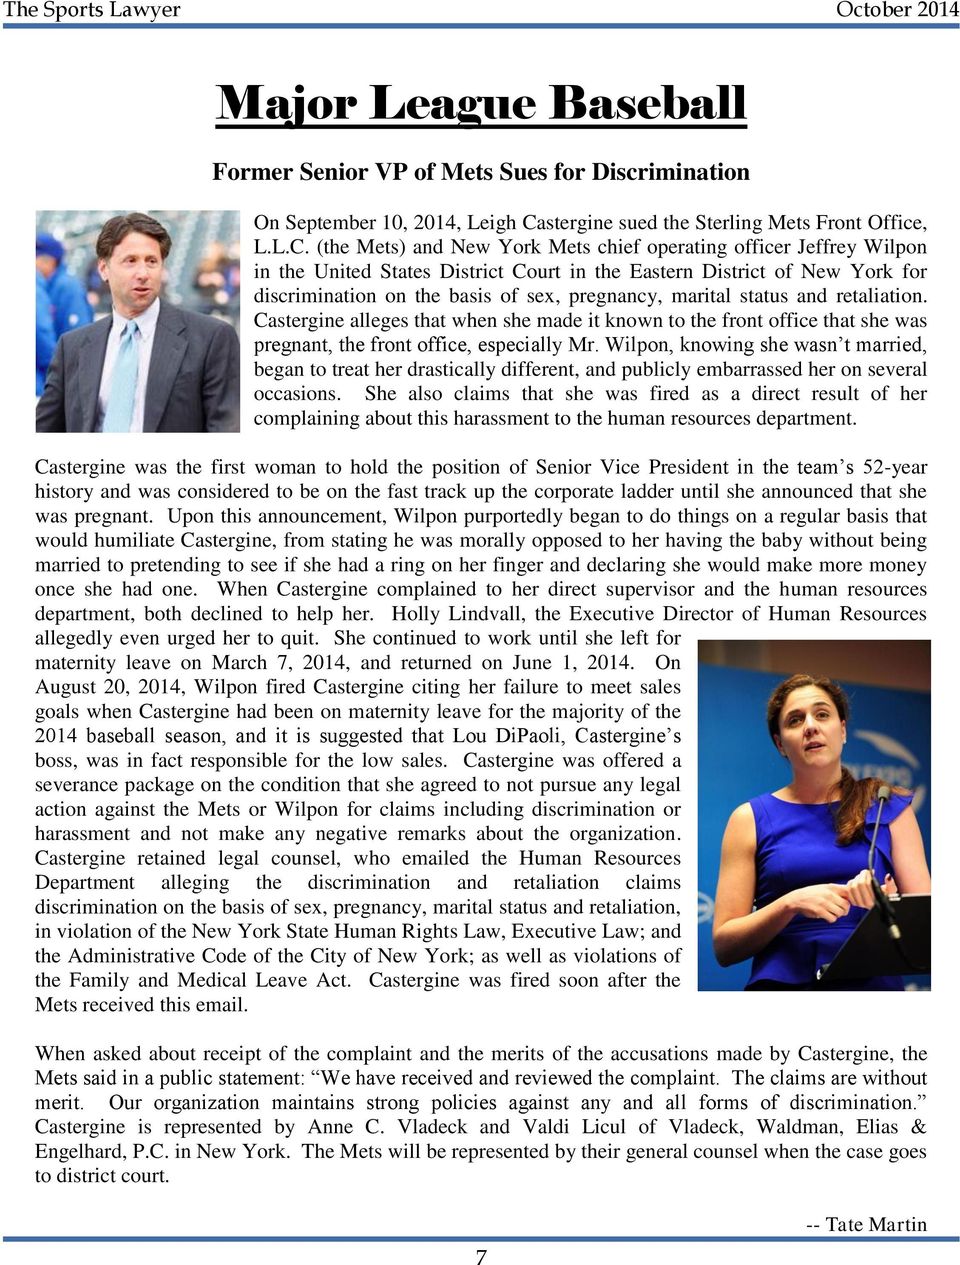 (the Mets) and New York Mets chief operating officer Jeffrey Wilpon in the United States District Court in the Eastern District of New York for discrimination on the basis of sex, pregnancy, marital